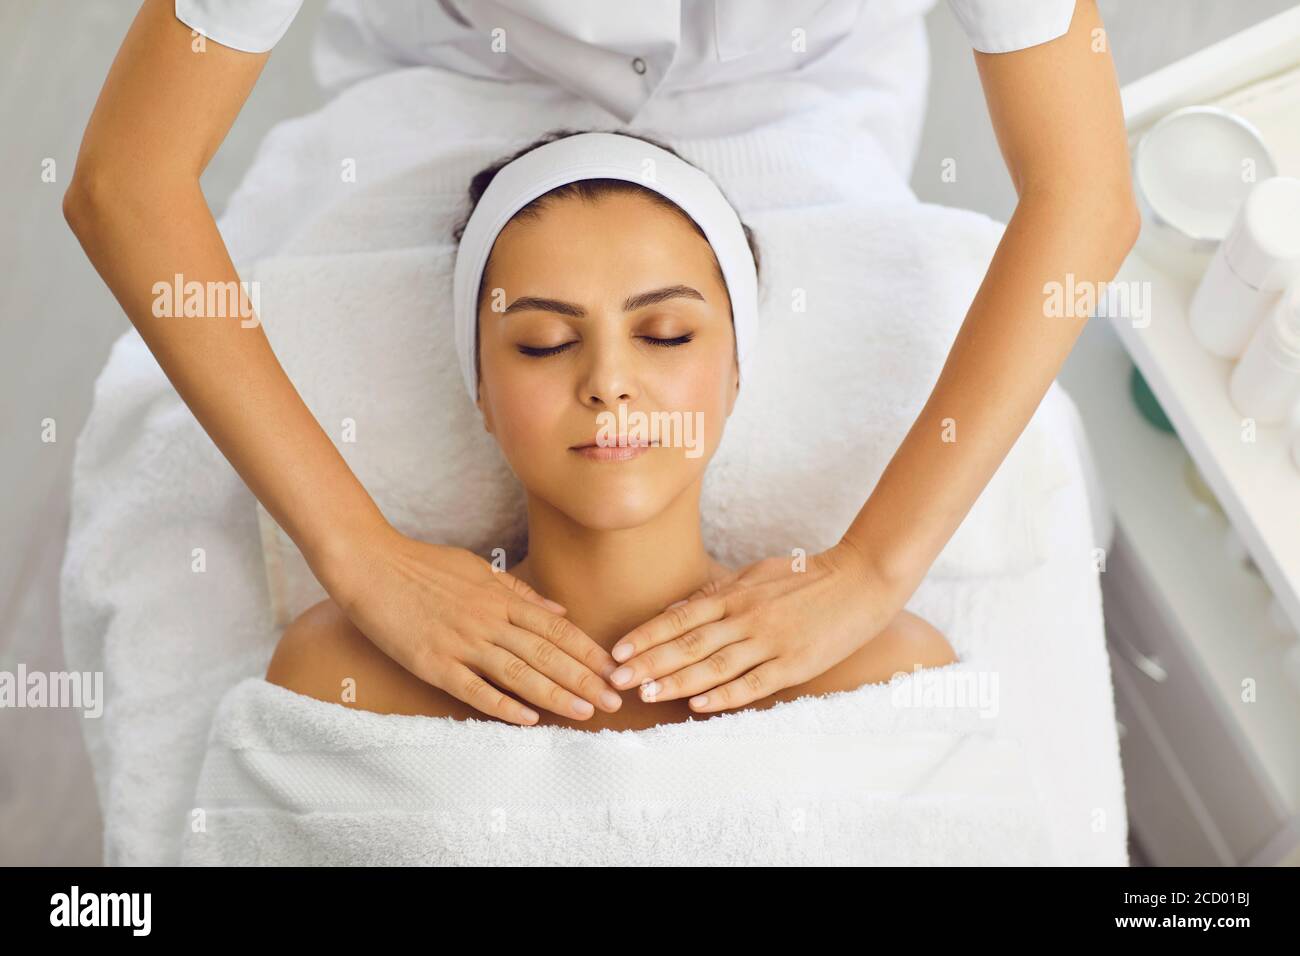 Cosmetologist or masseur making massage of upper shoulder girdle for woman in beauty salon Stock Photo